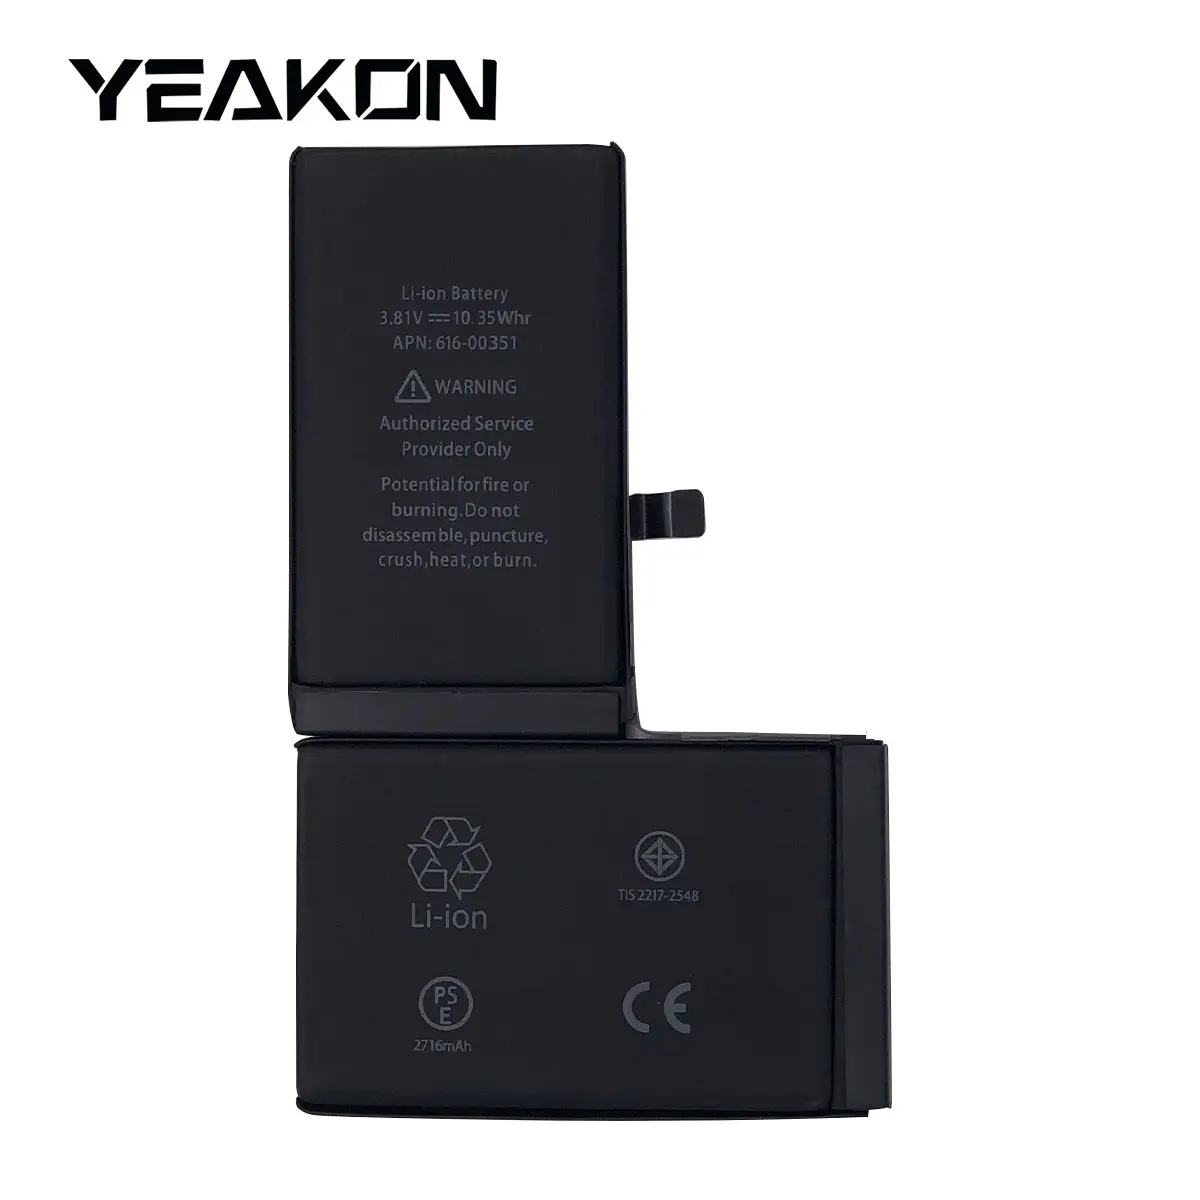 YEAKON X IX 8X Battery Replacement For iPhone 5 5S 5C SE 6 6S 6P 6SP 7 7G 7P 8 8G 8P Plus X XS MAX XR 11 12 13 Pro MAX Batteries